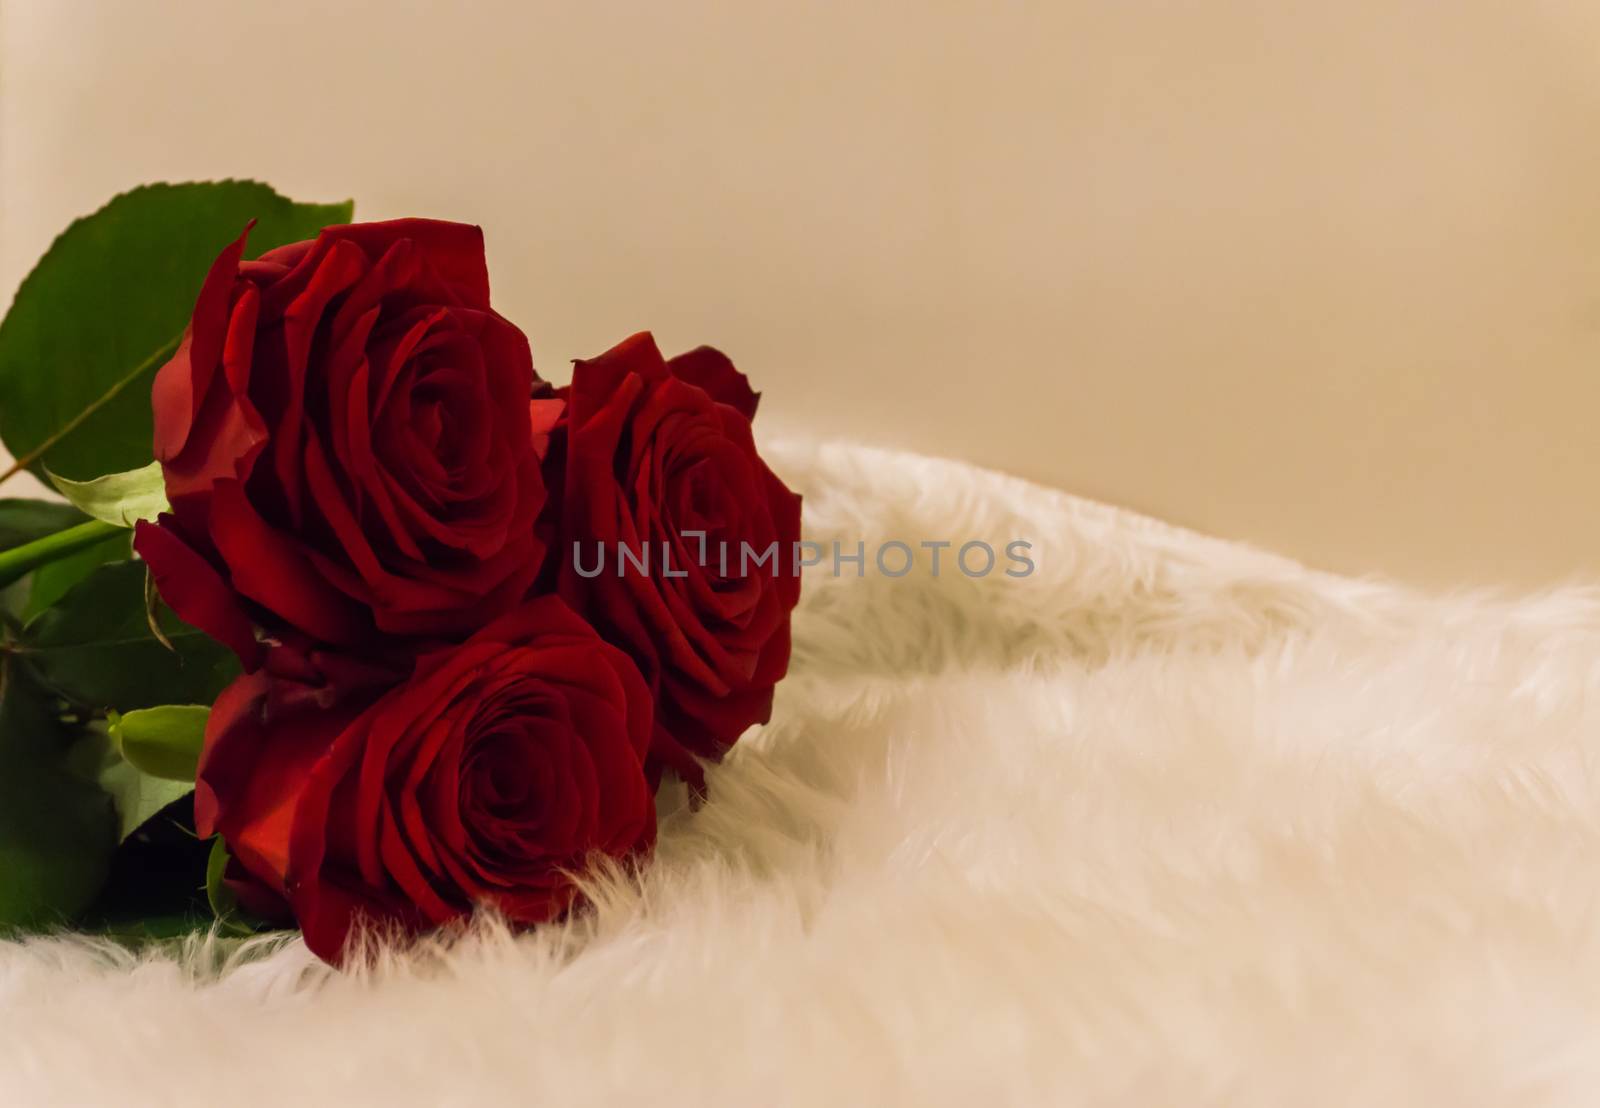 bouquet of red roses laying on a white carpet romantic symbol of love and appreciation on valentines day by charlottebleijenberg